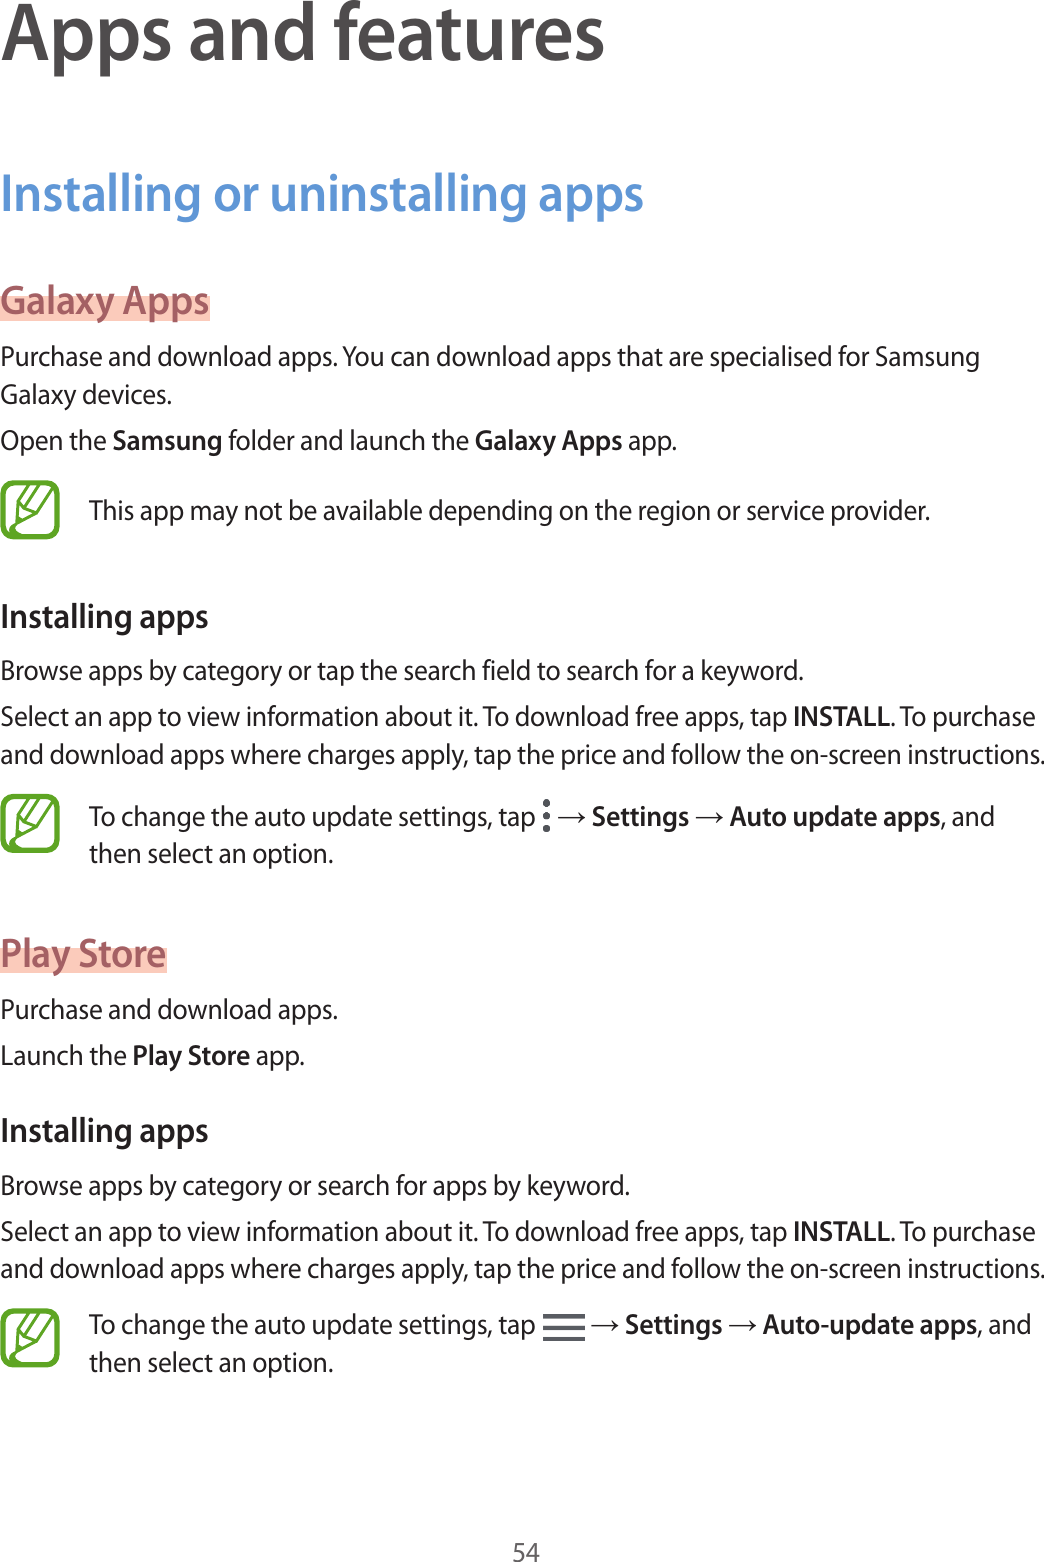 54Apps and featuresInstalling or uninstalling appsGalaxy AppsPurchase and download apps. You can download apps that are specialised for Samsung Galaxy devices.Open the Samsung folder and launch the Galaxy Apps app.This app may not be available depending on the region or service provider.Installing appsBrowse apps by category or tap the search field to search for a keyword.Select an app to view information about it. To download free apps, tap INSTALL. To purchase and download apps where charges apply, tap the price and follow the on-screen instructions.To change the auto update settings, tap   → Settings → Auto update apps, and then select an option.Play StorePurchase and download apps.Launch the Play Store app.Installing appsBrowse apps by category or search for apps by keyword.Select an app to view information about it. To download free apps, tap INSTALL. To purchase and download apps where charges apply, tap the price and follow the on-screen instructions.To change the auto update settings, tap   → Settings → Auto-update apps, and then select an option.